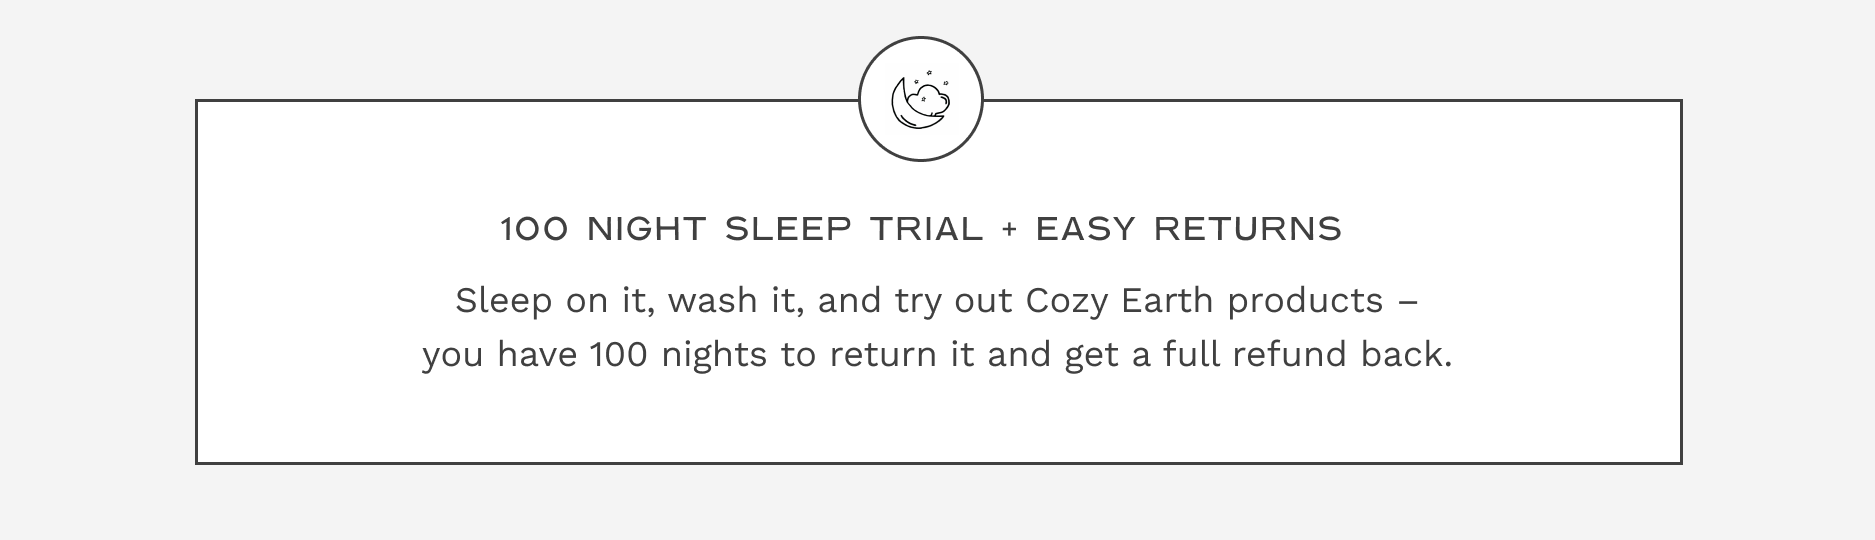 Image of product 100 night sleep trial and returns guarantee